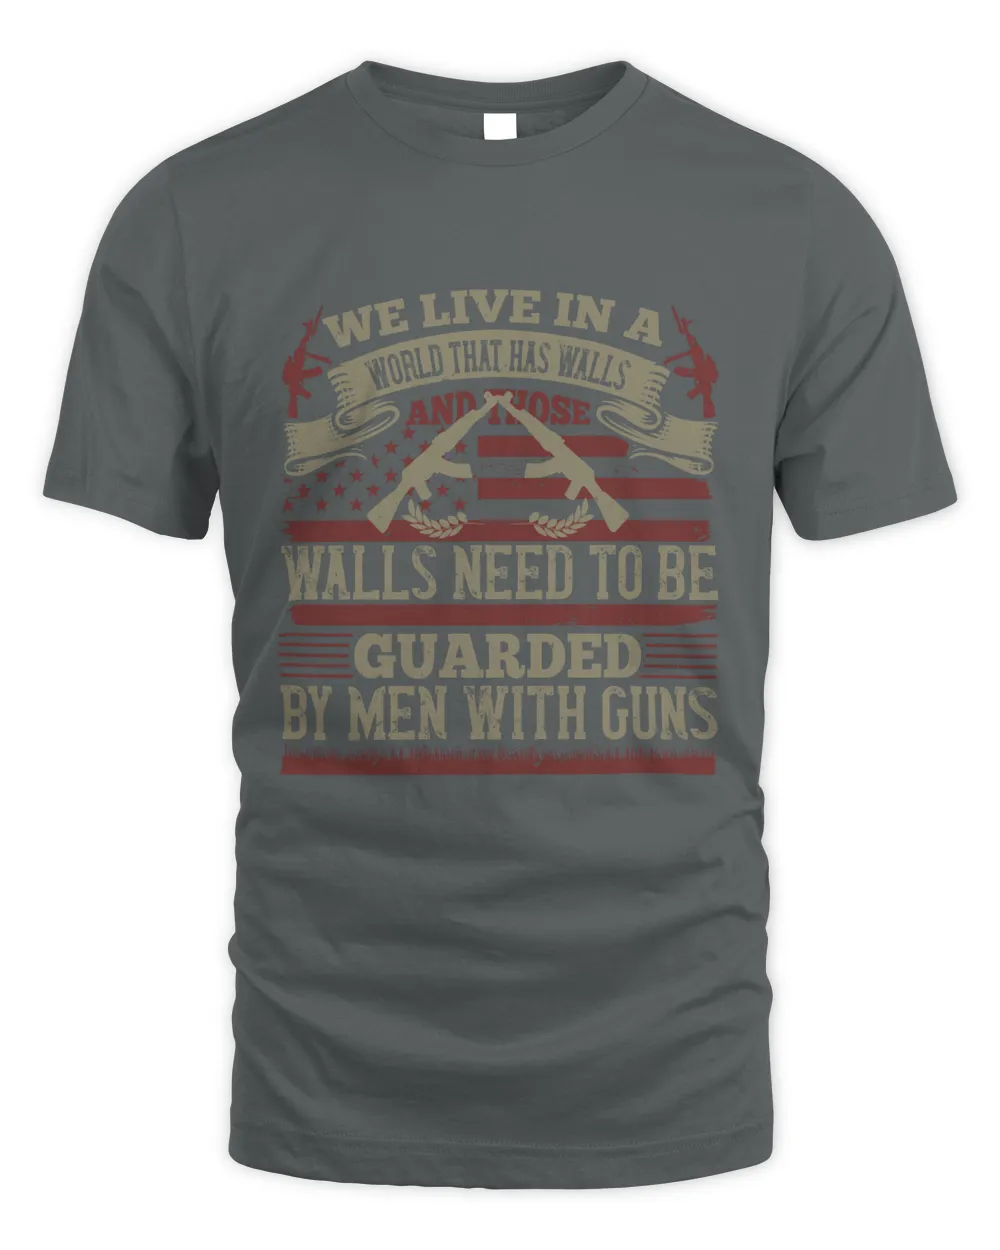 We live in a world that has walls, and those walls need to be guarded by men with guns-01